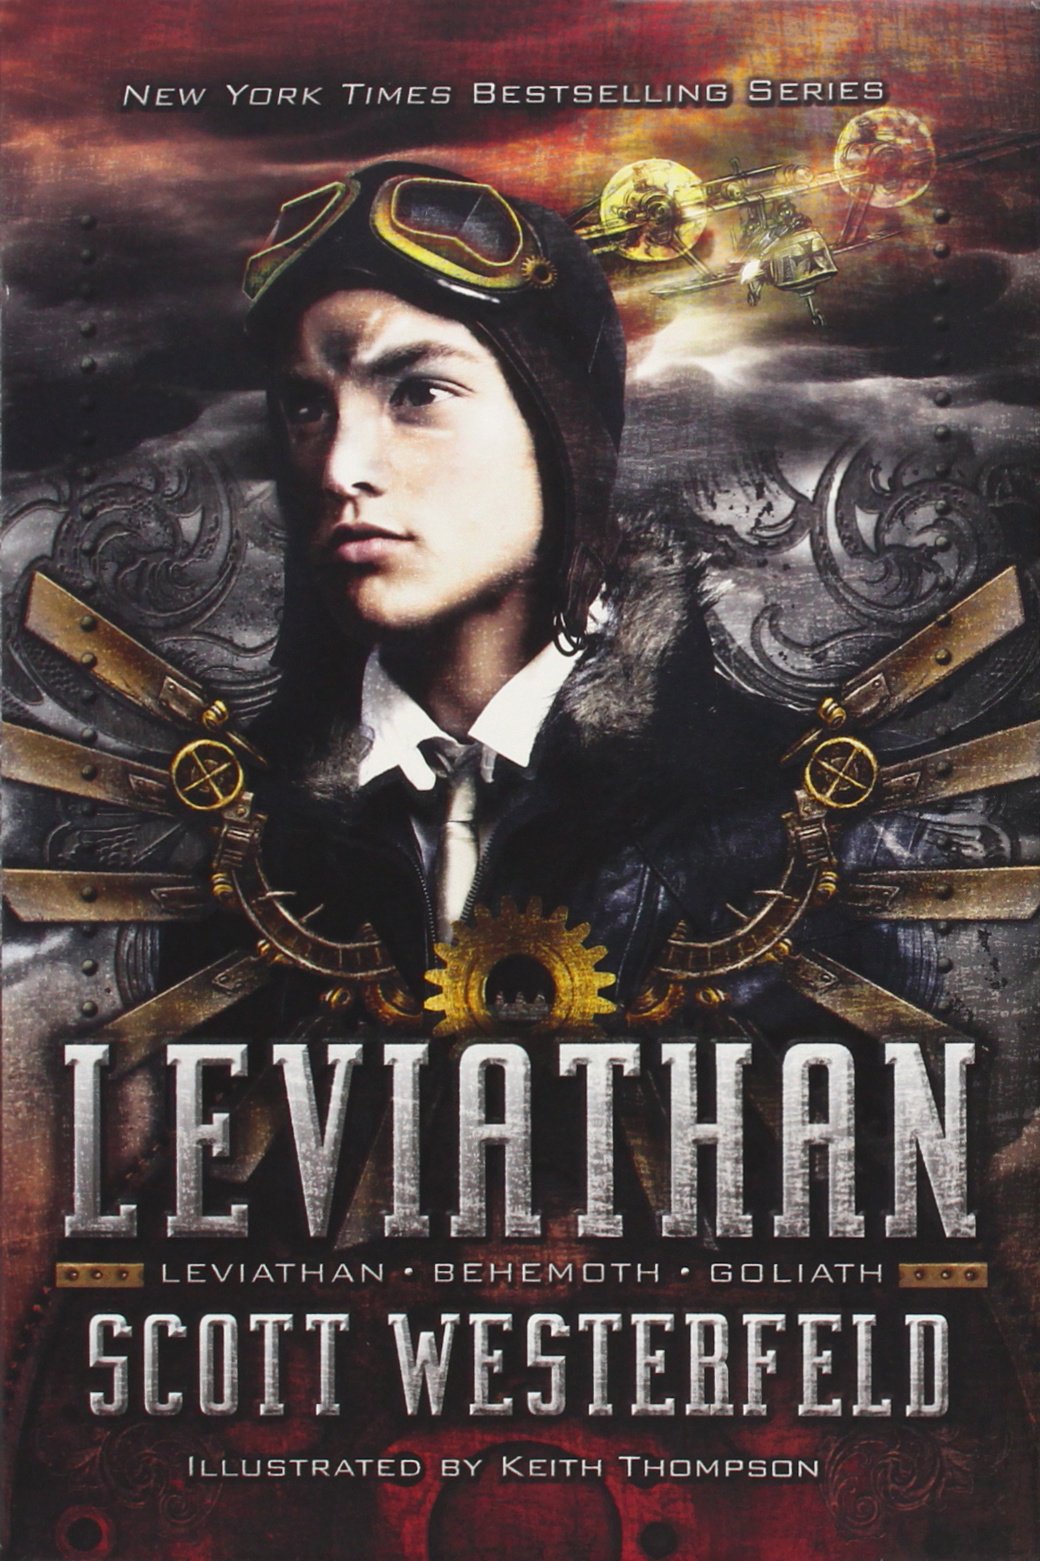 Image of the cover of the book, Leviathan